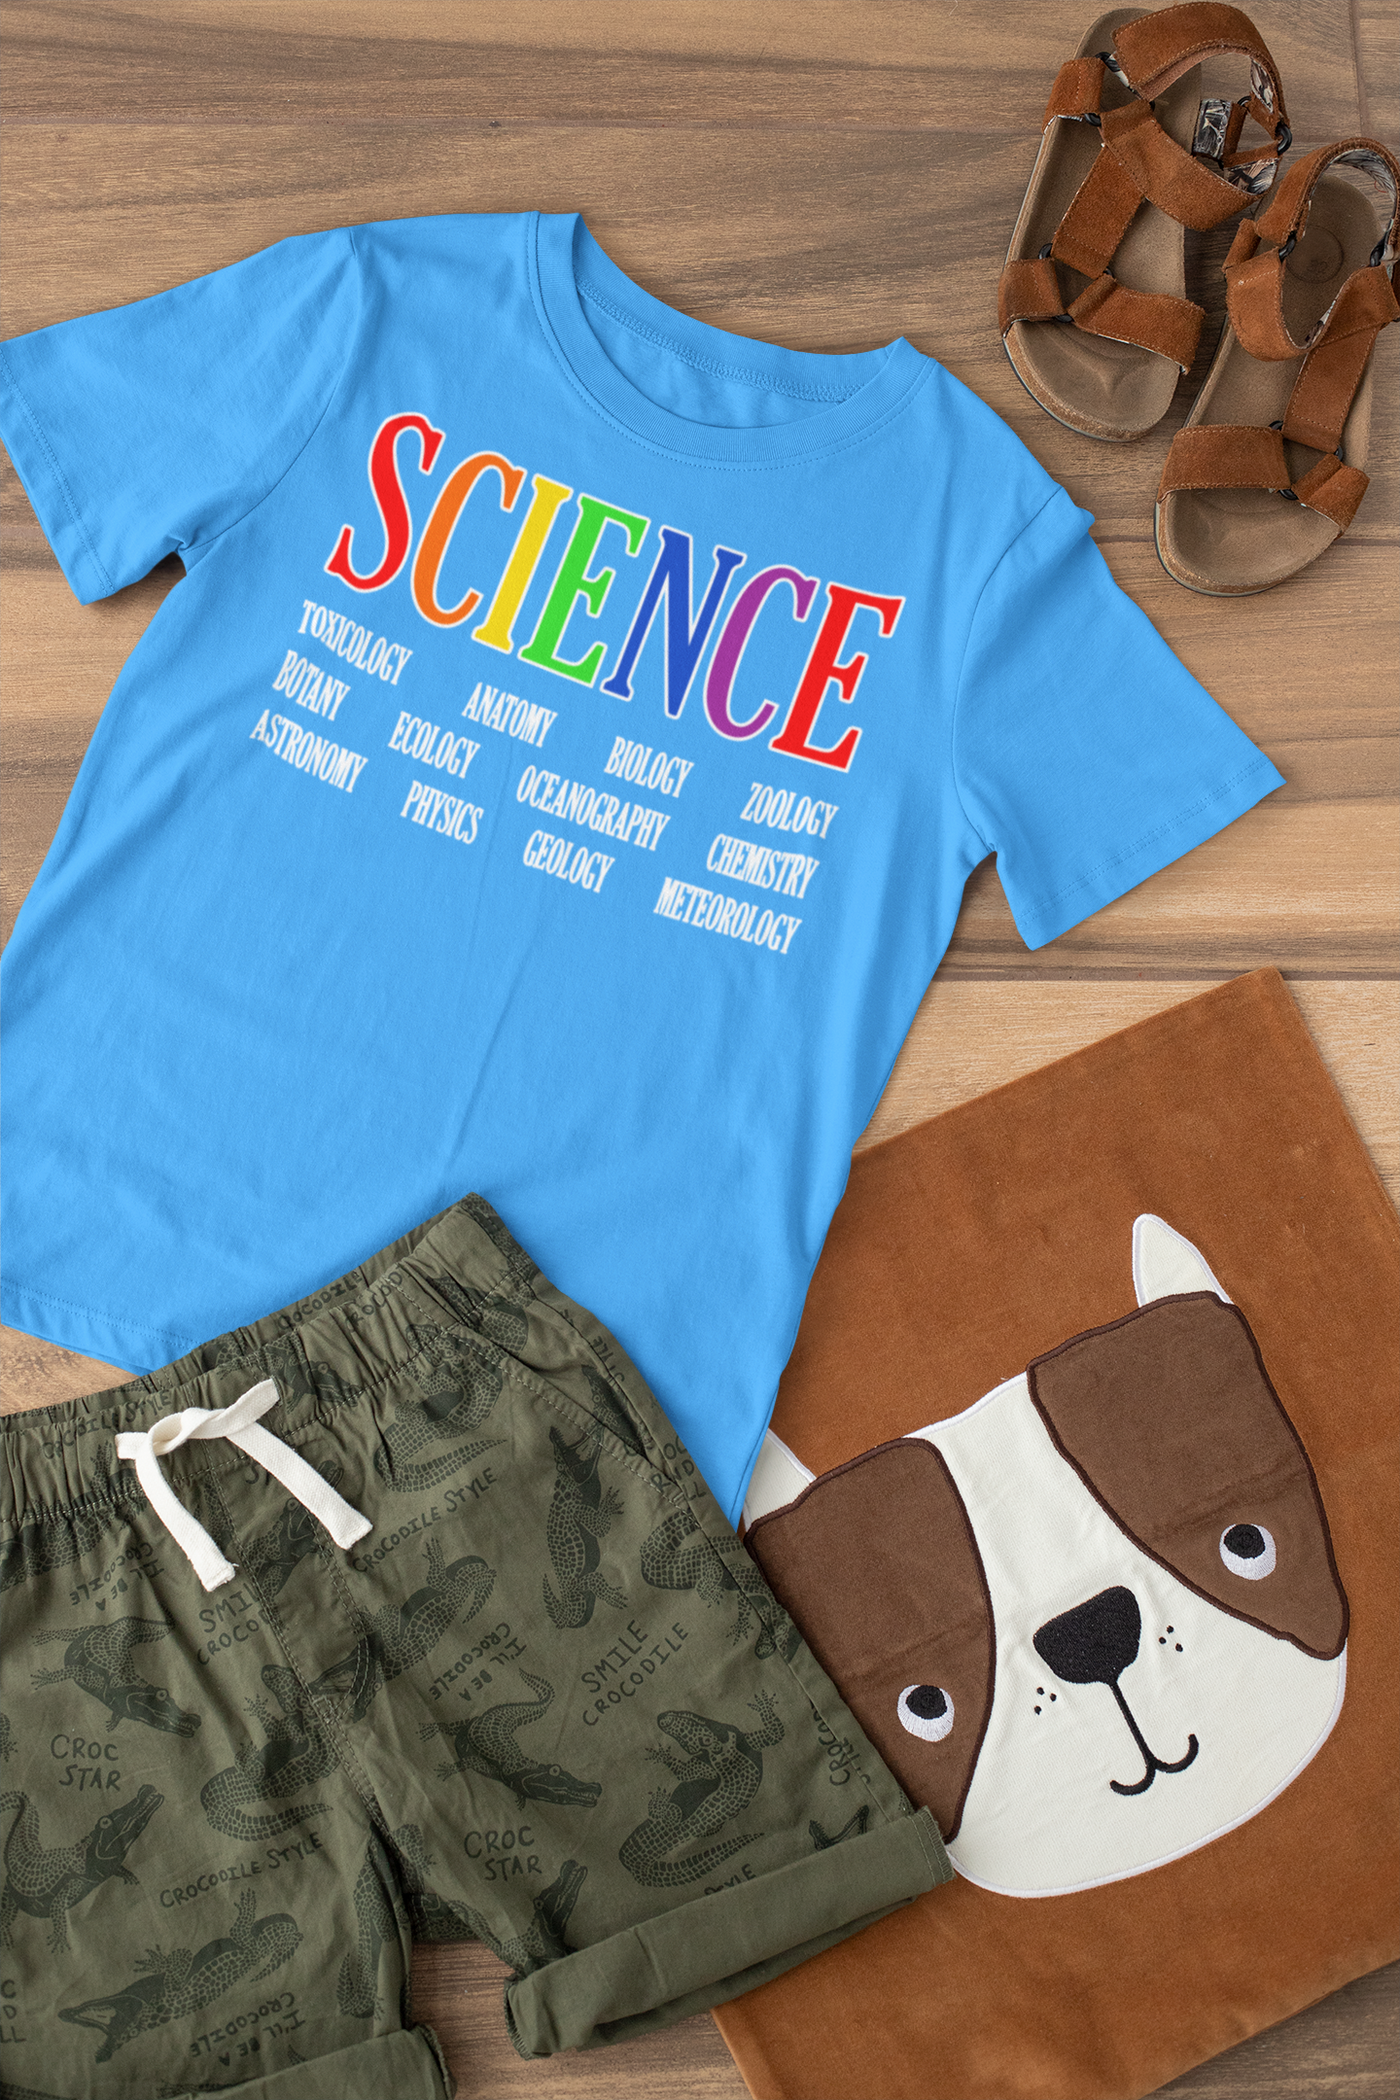 Youth SCIENCE T-Shirt